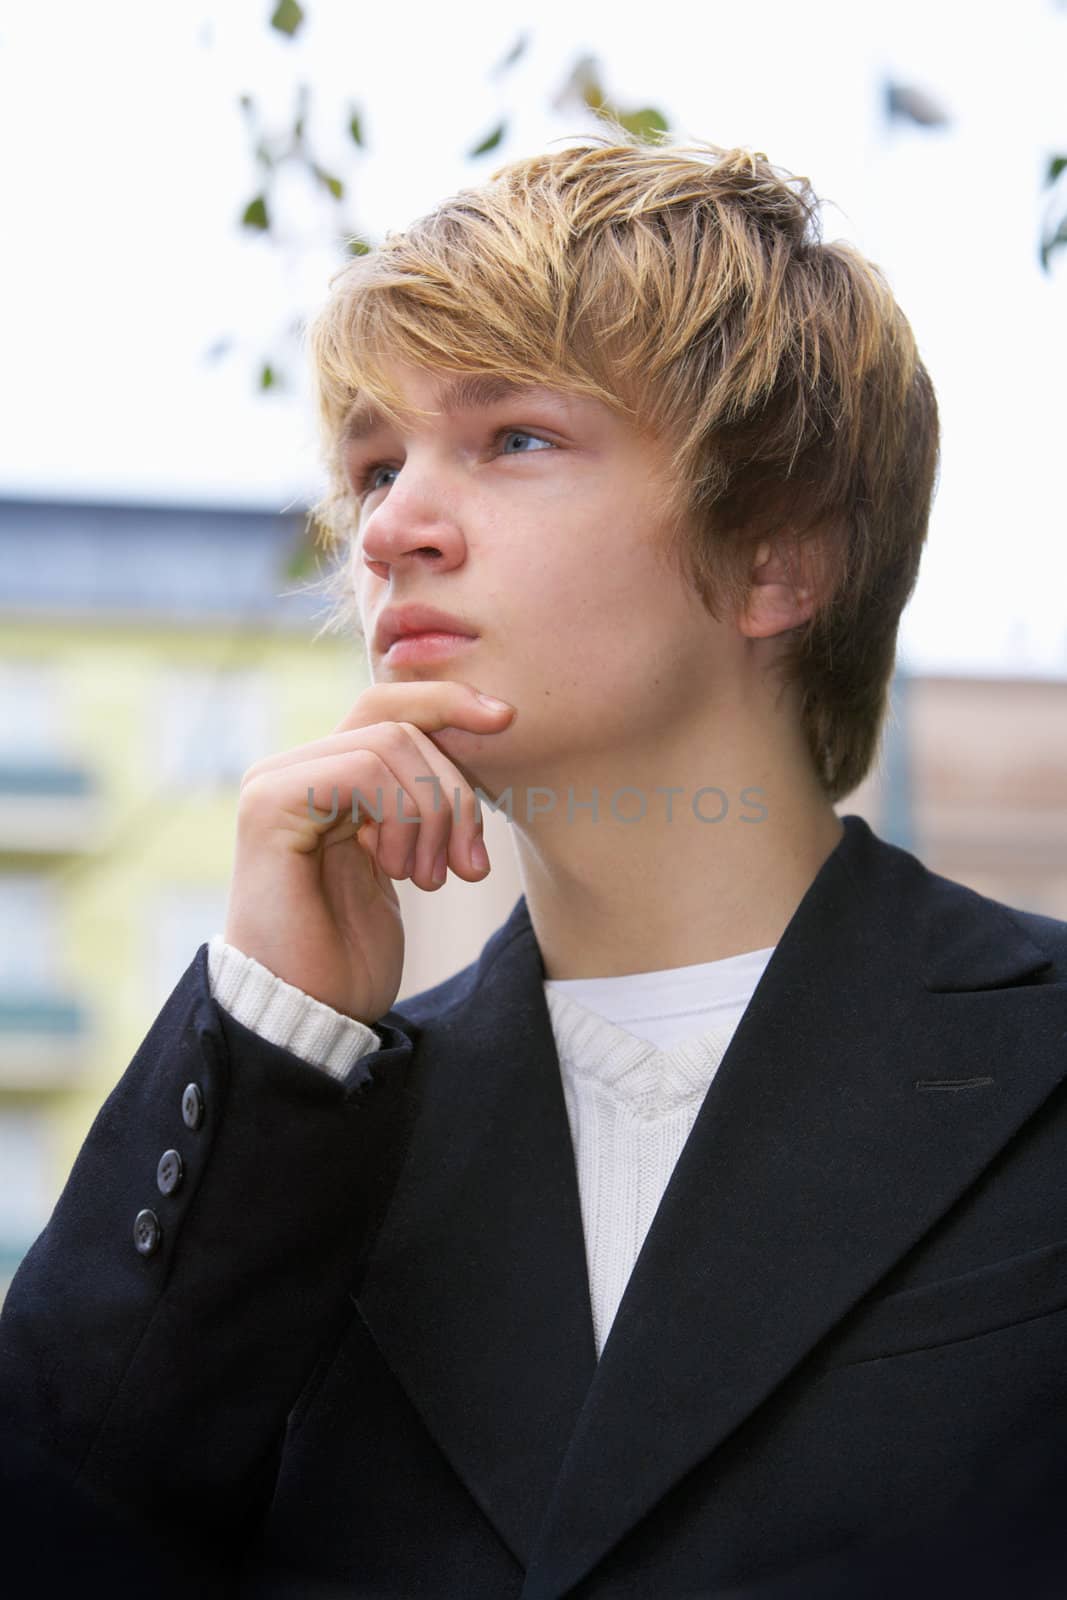 Teenage boy contemplating in city park, close-up